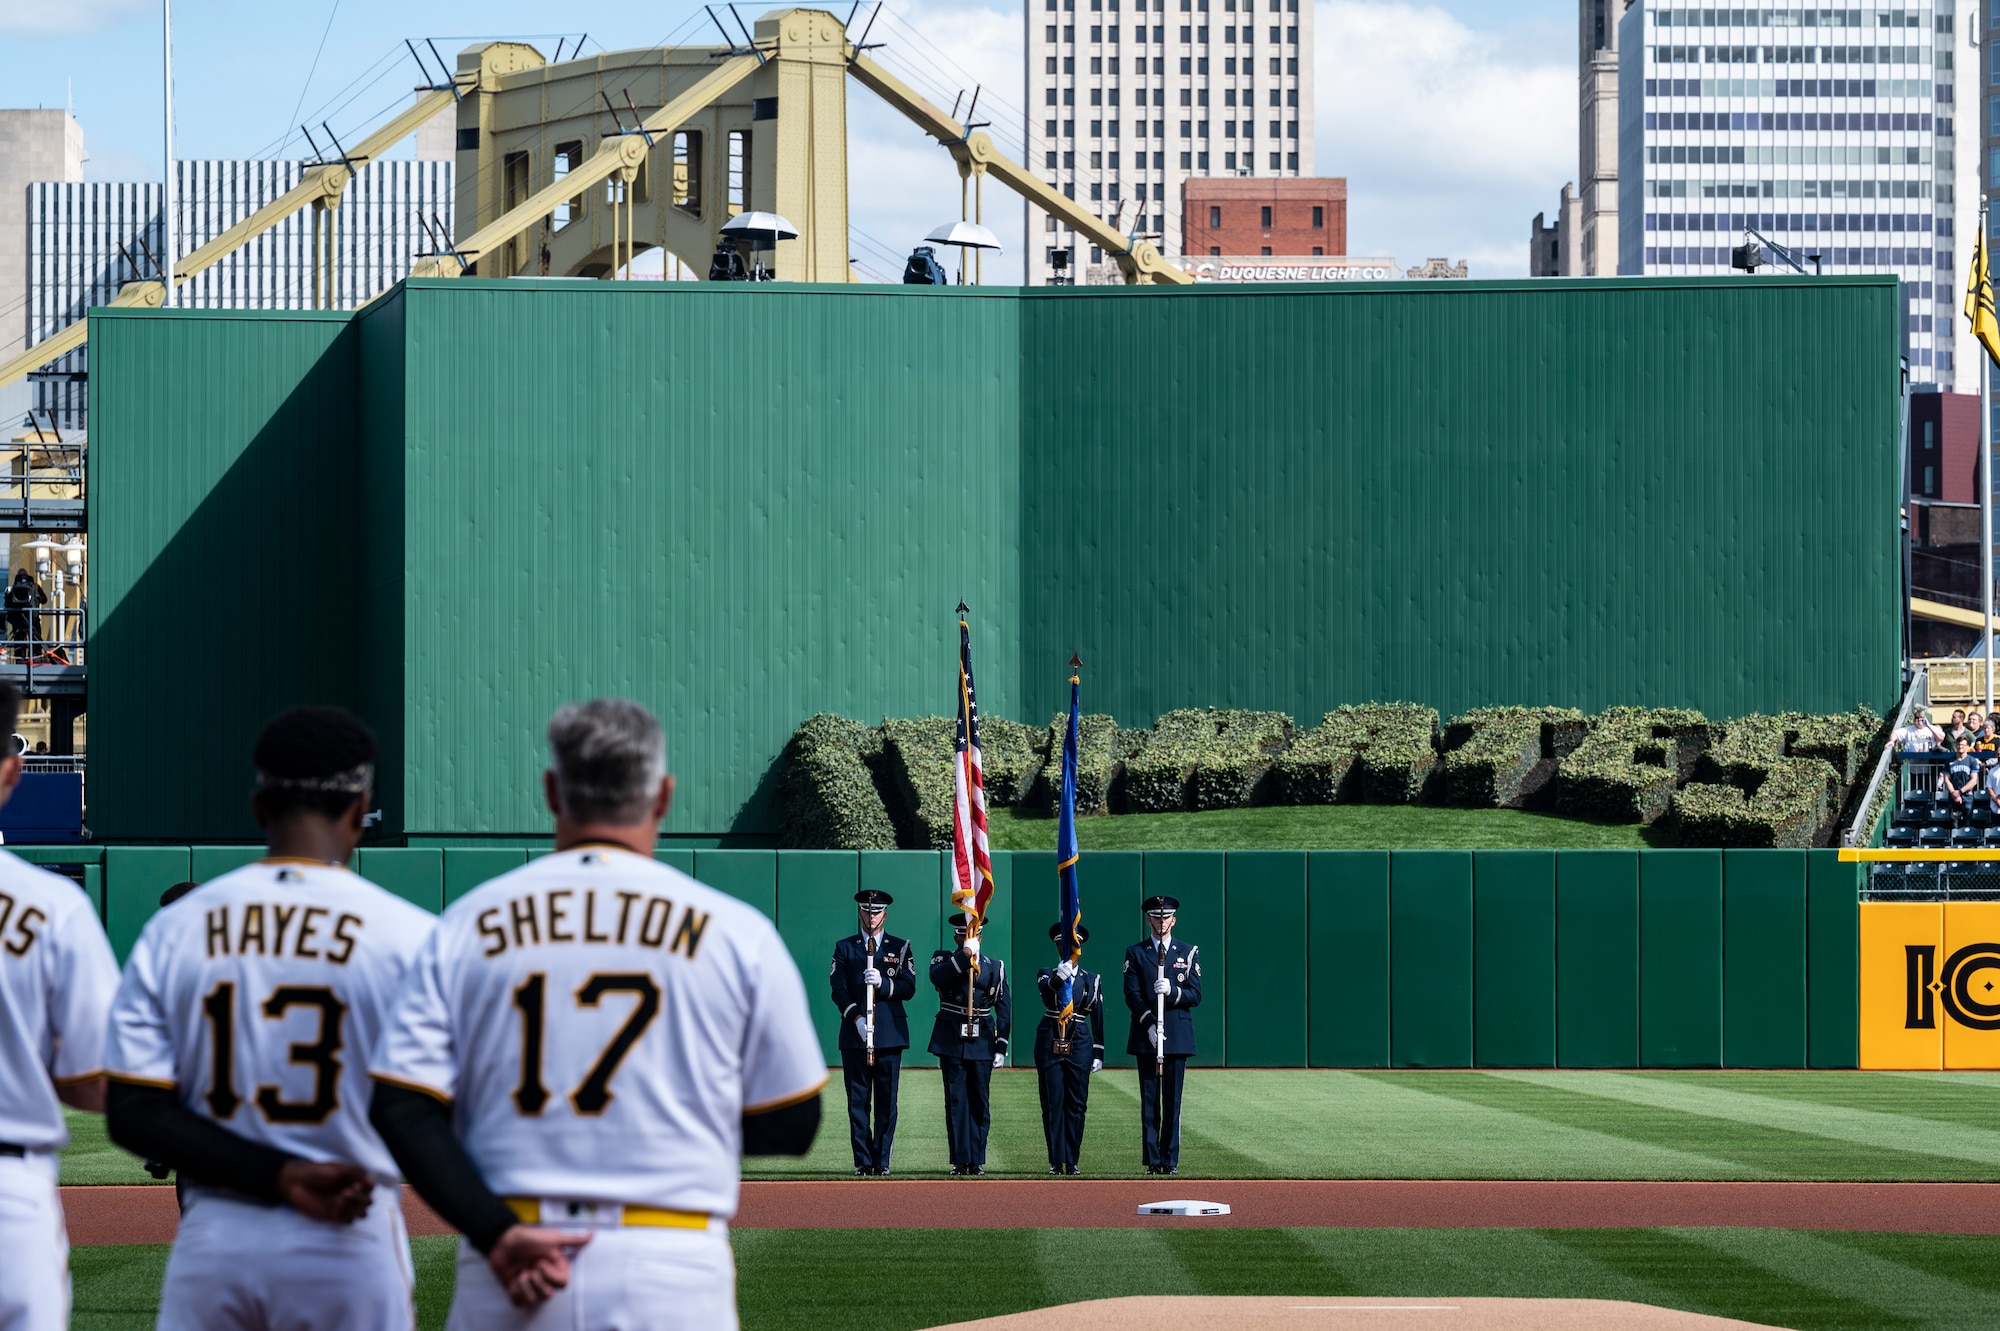 Airmen assigned to the 911th Airlift Wing Honor Guard present the colors during the singing of the National Anthem before the Pittsburgh Pirates home opener at PNC Park in Pittsburgh, Pennsylvania, April 12, 2022.